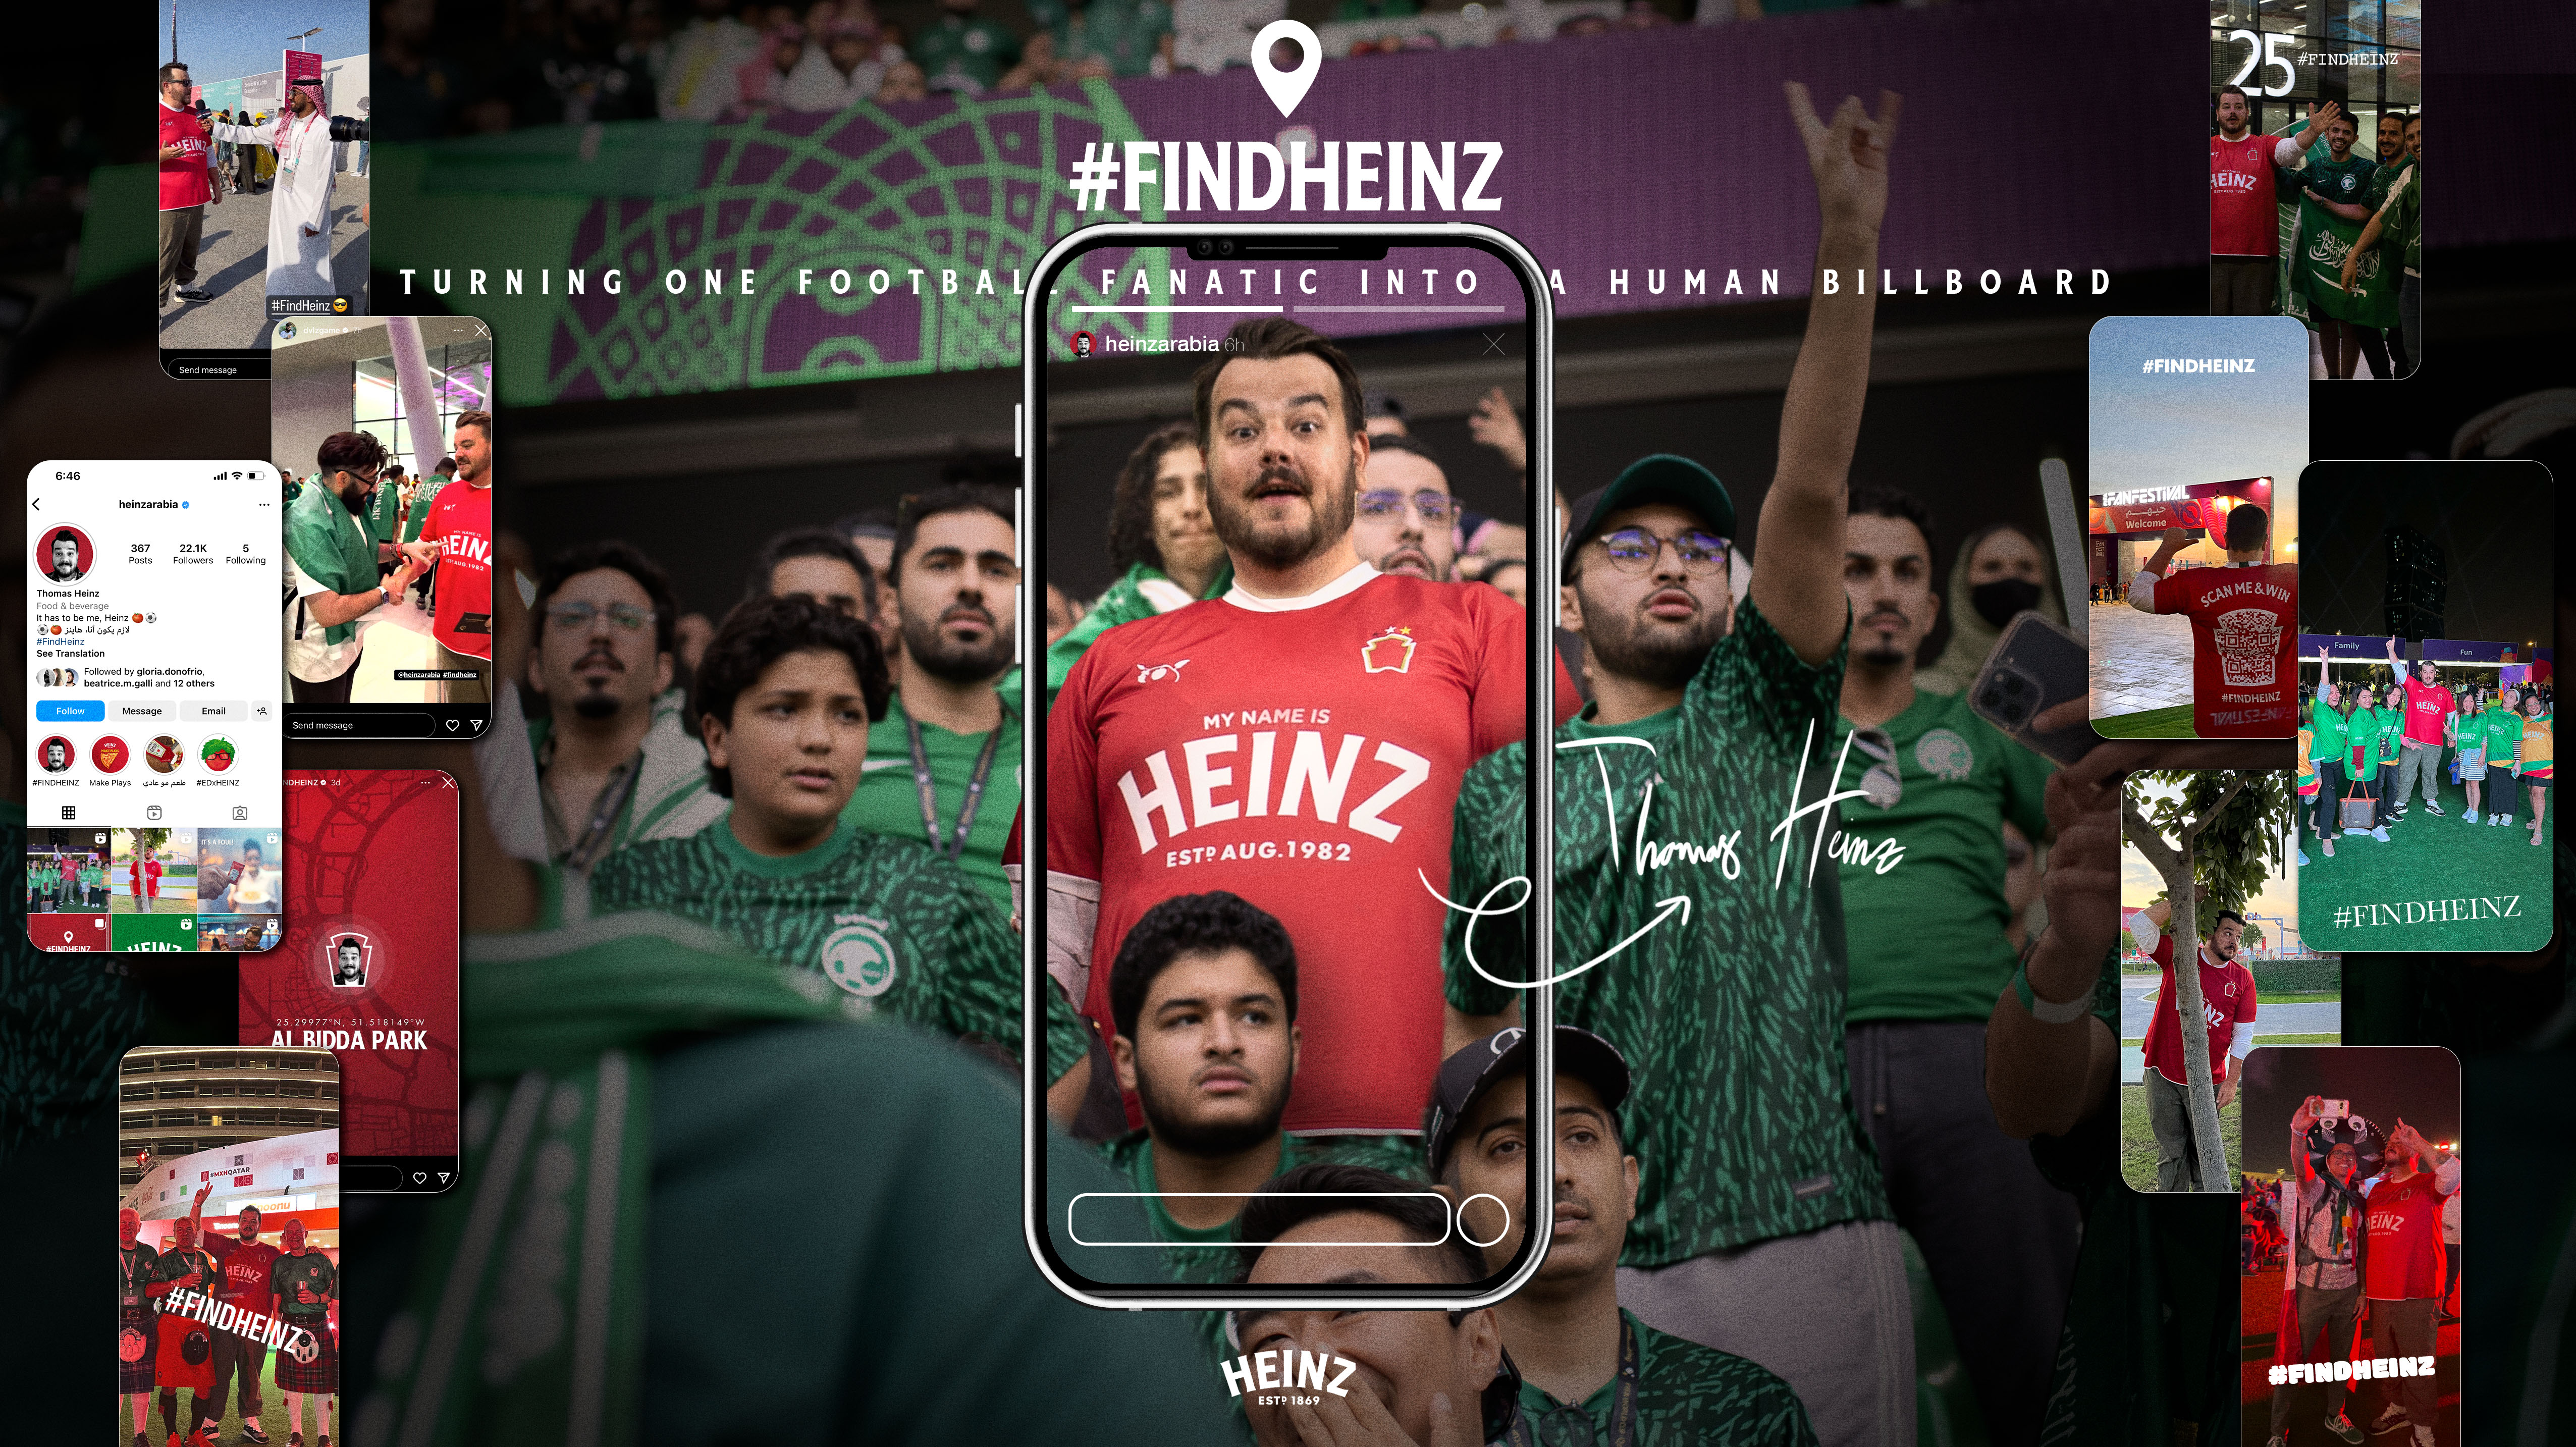 Heinz Arabia Dives into FIFA Spirit with its Latest Campaign